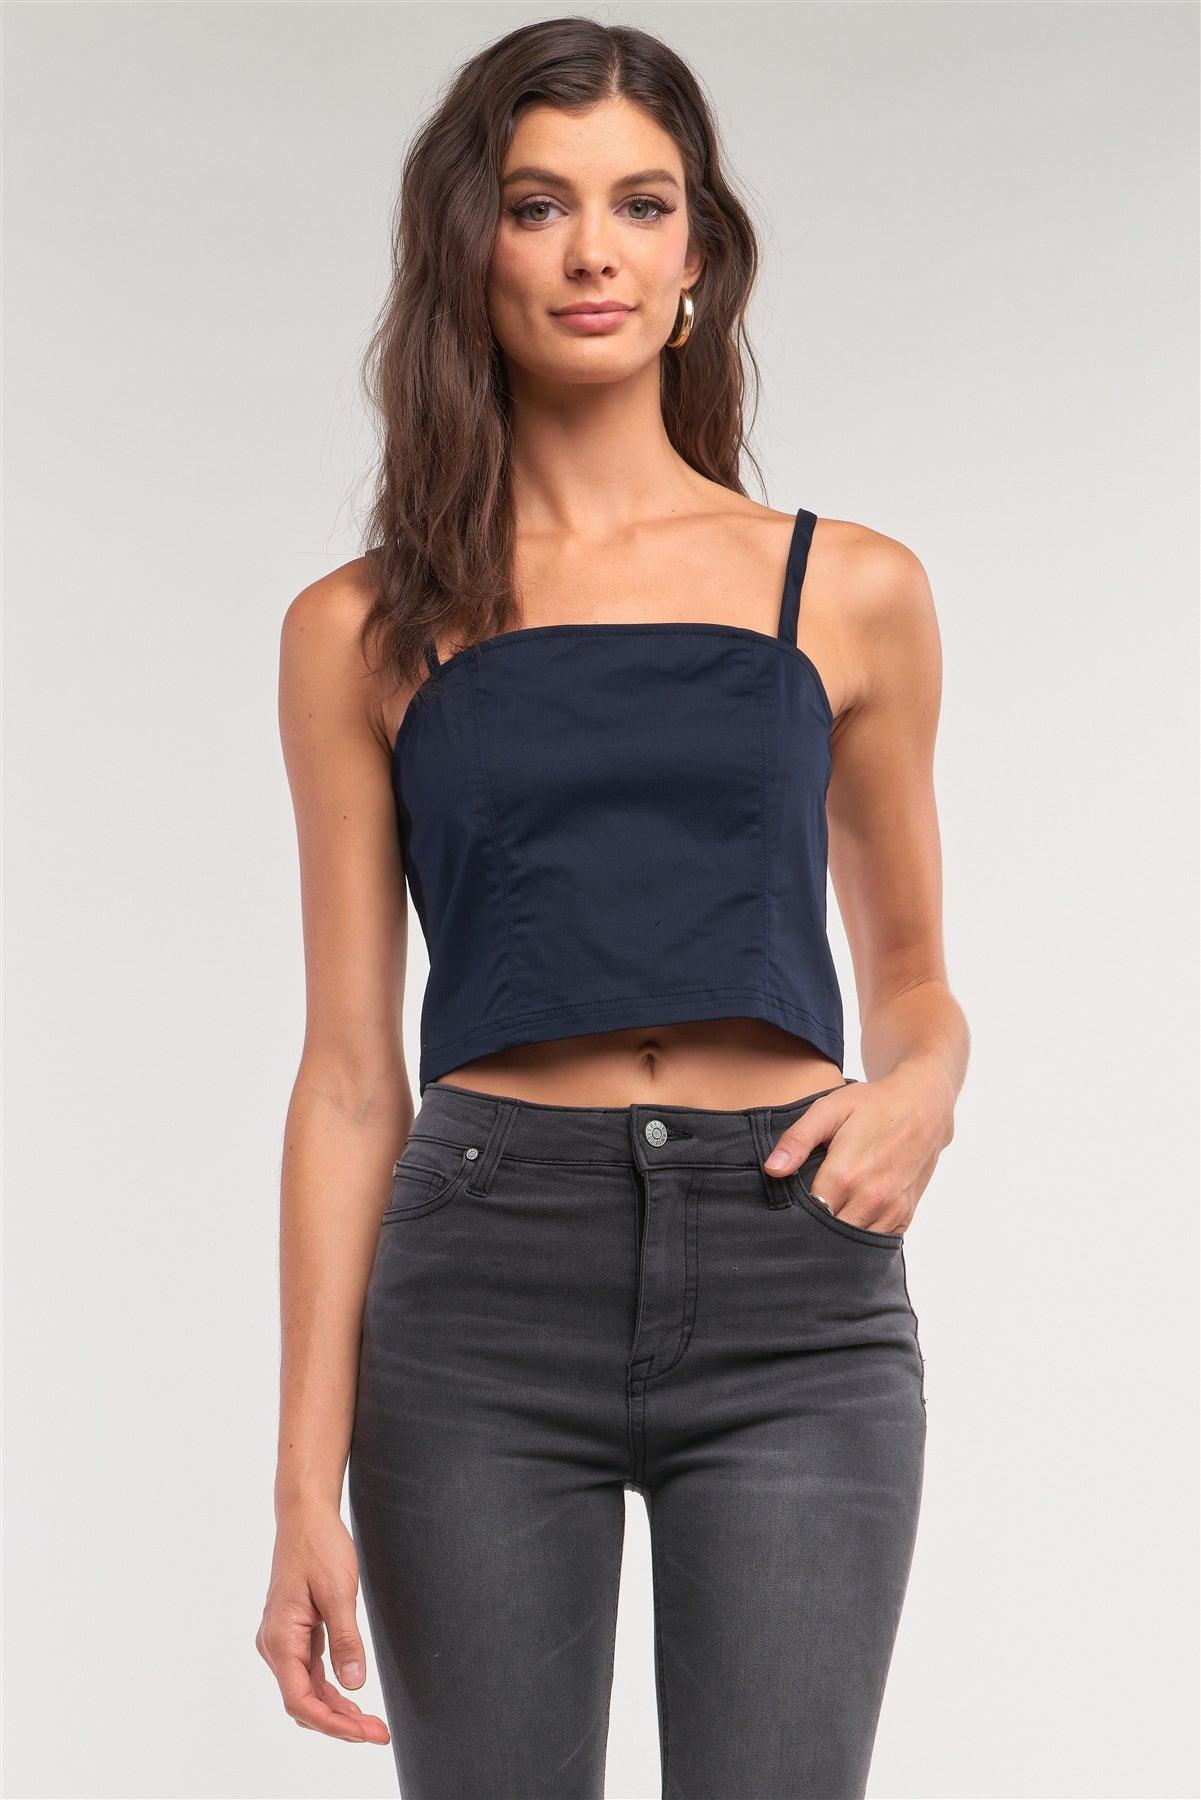 Navy Sleeveless Square Neck Back Zipper Closure Cropped Top /1-2-2-1